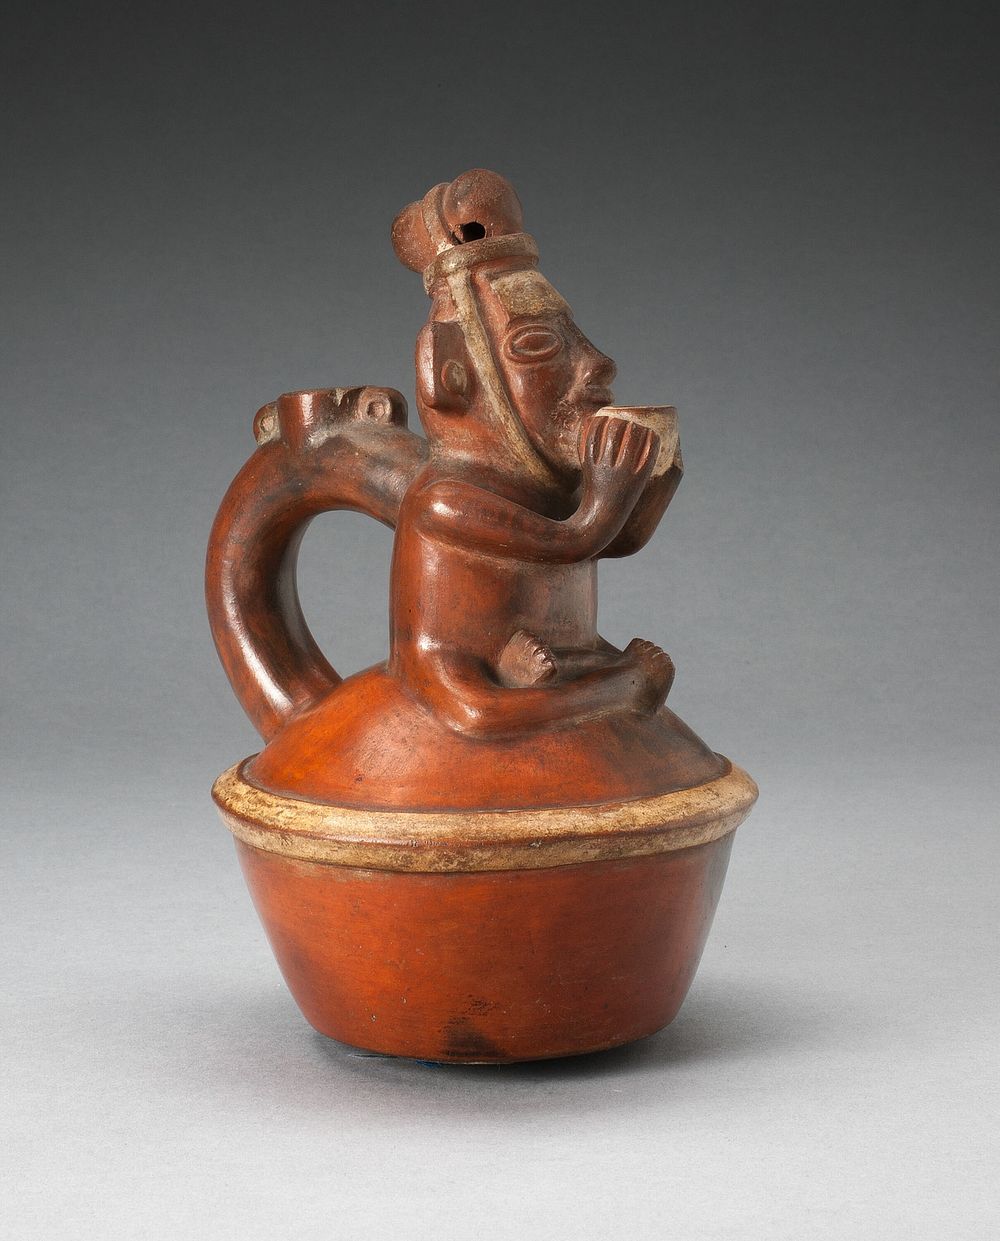 Handle Spout Vessel Depicting Seated Figure Drinking from Cup by Chimú